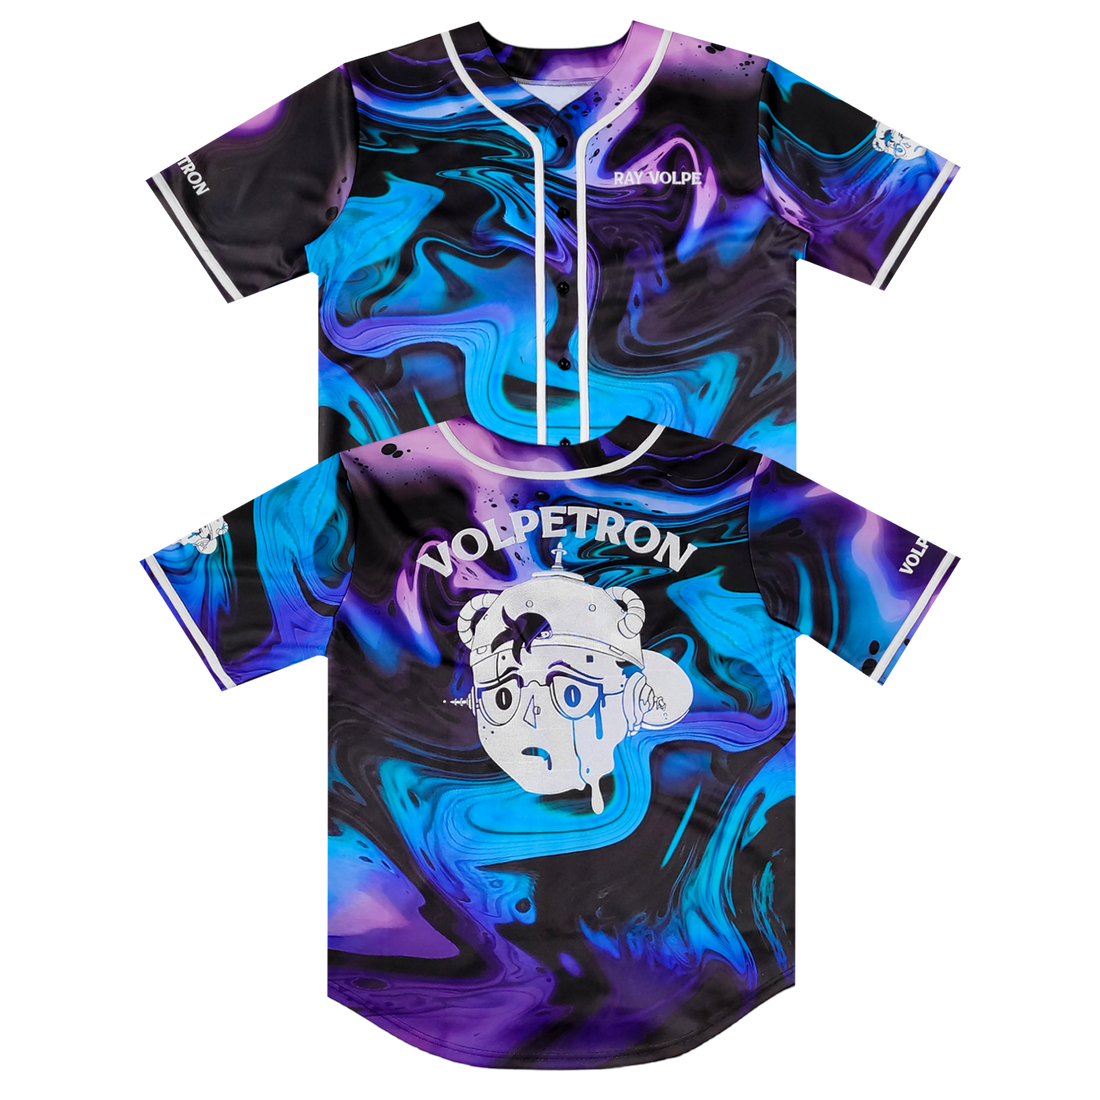 RAY VOLPE VOLPETRON FACE MELT JERSEY